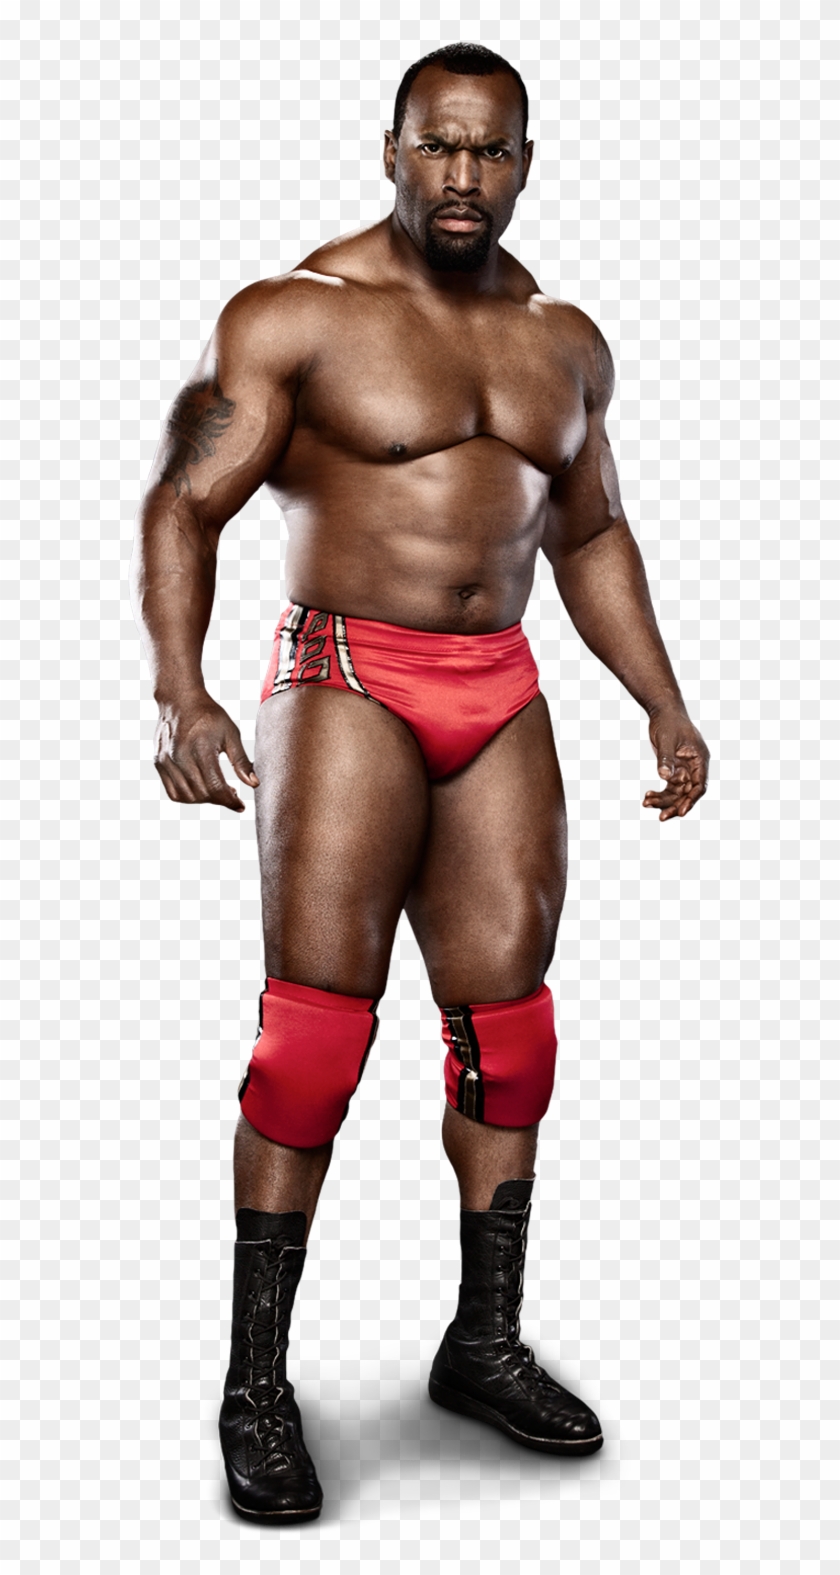 Most Underrated Big Guys In The Wwe In The Last 15 - Wwe Ezekiel Jackson Png Clipart #495996